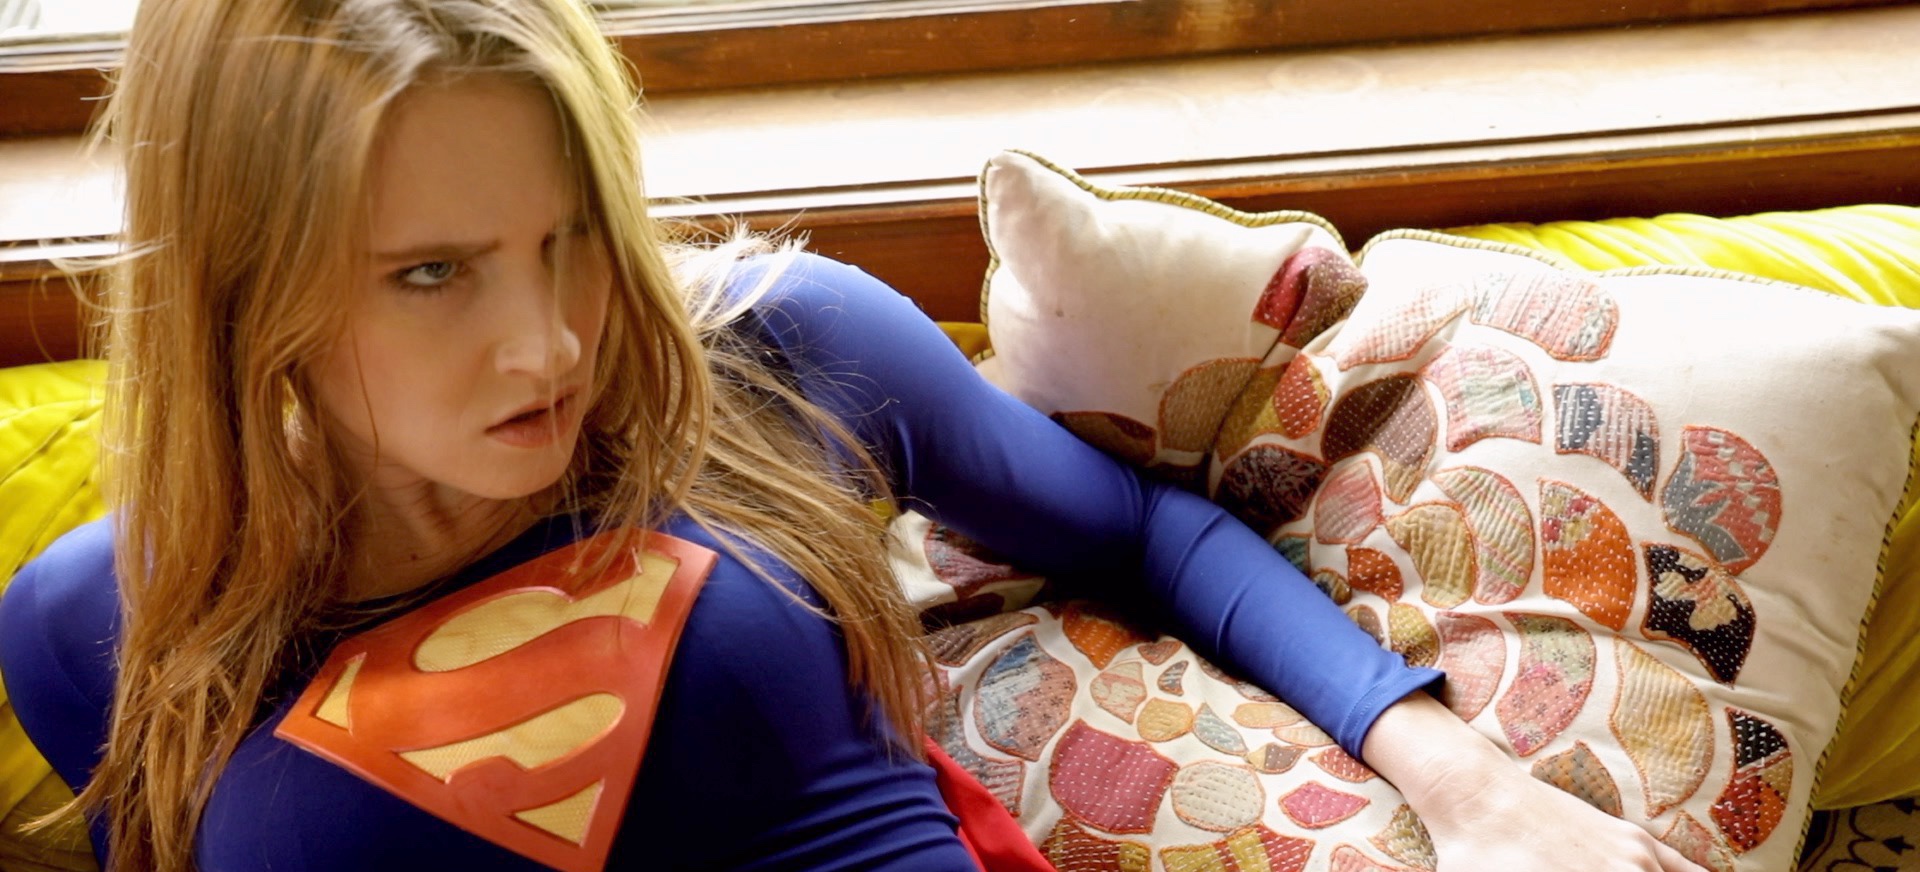 Supergirl therapy - melody marks